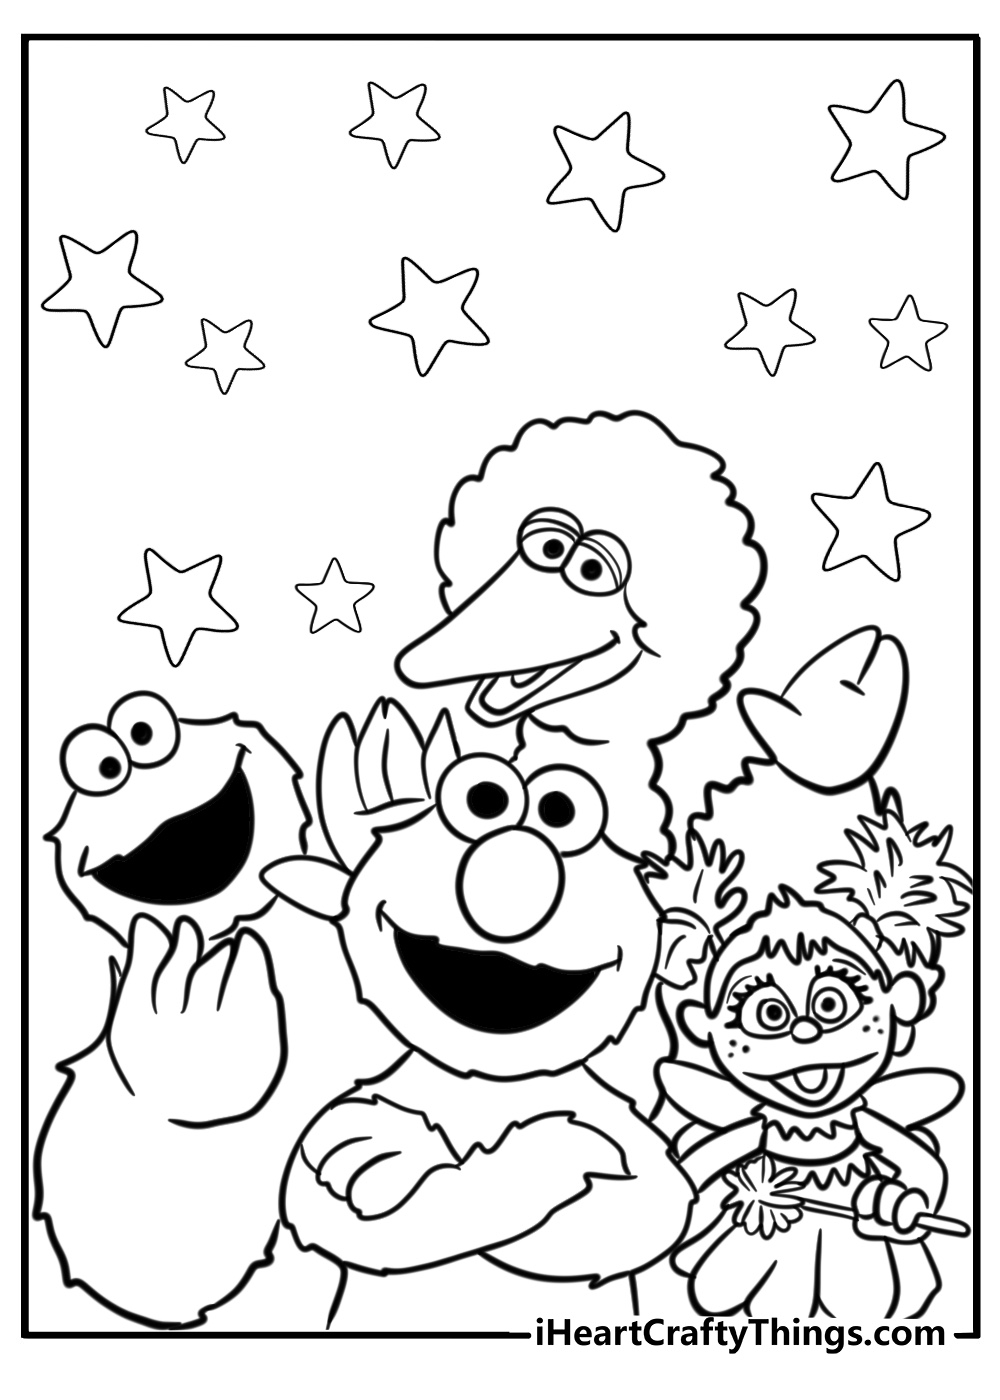 Elmo and friends coloring page